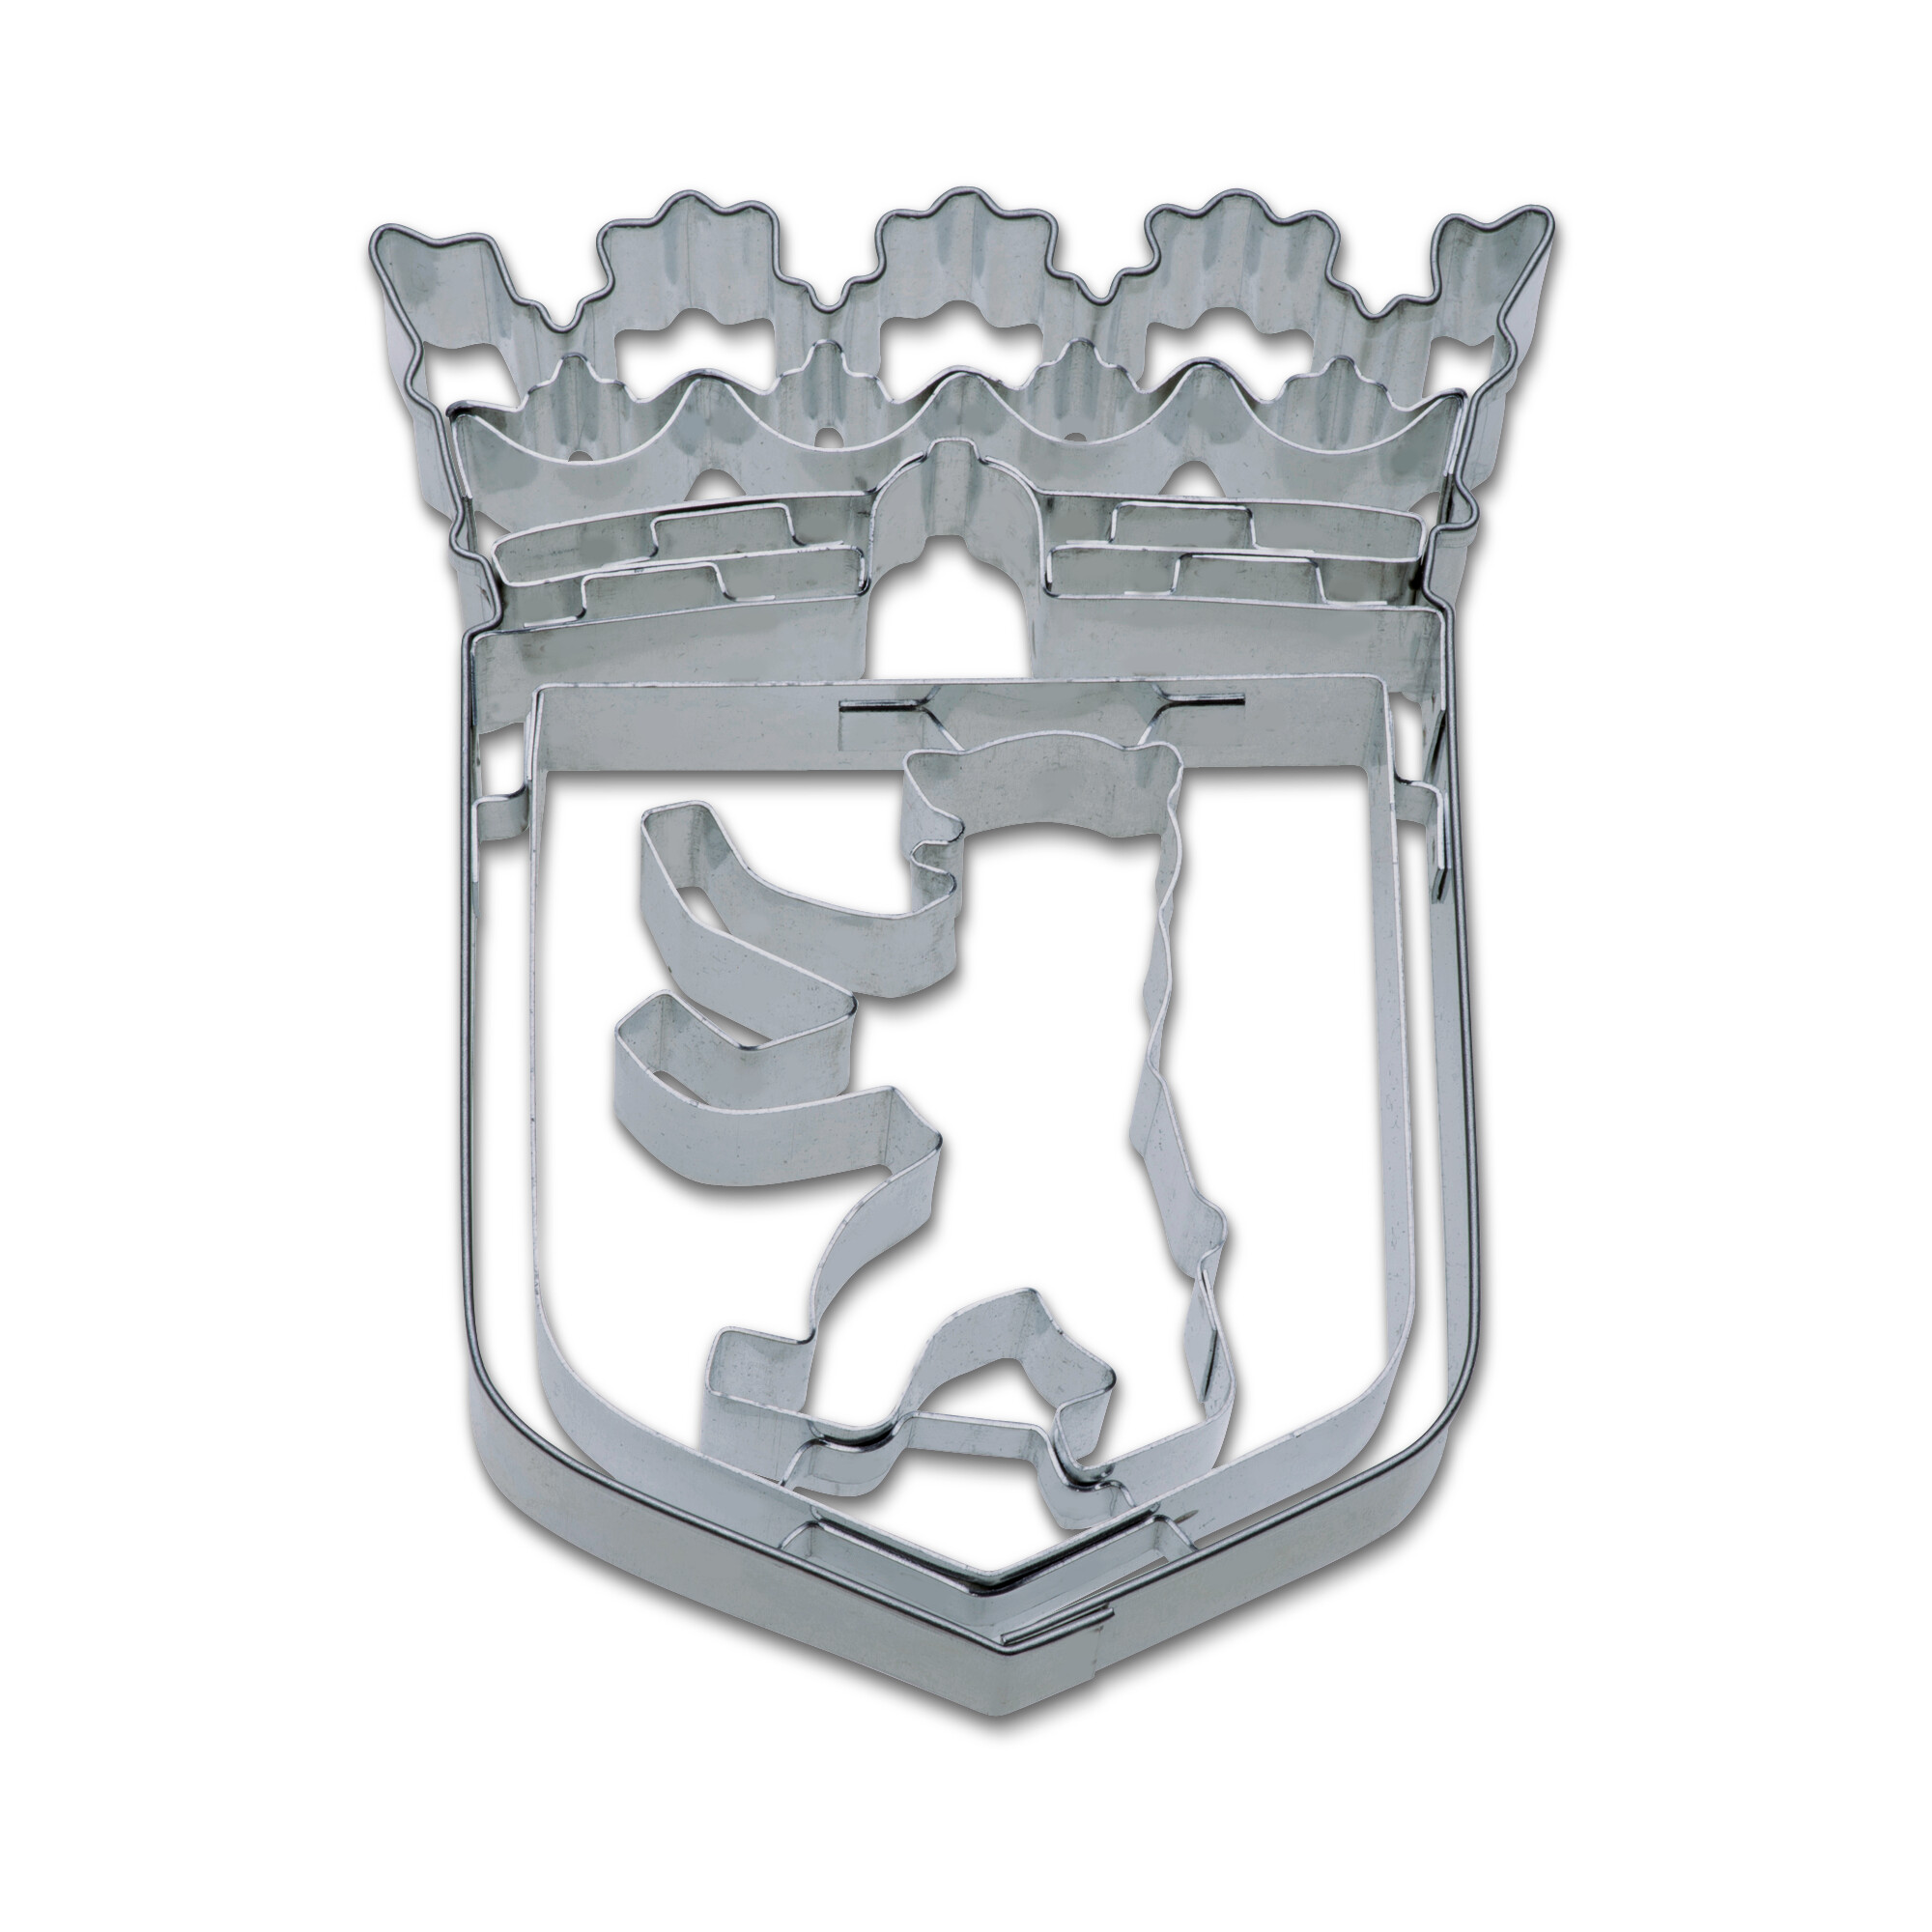 Cookie cutter with stamp – Berlin coat of arms